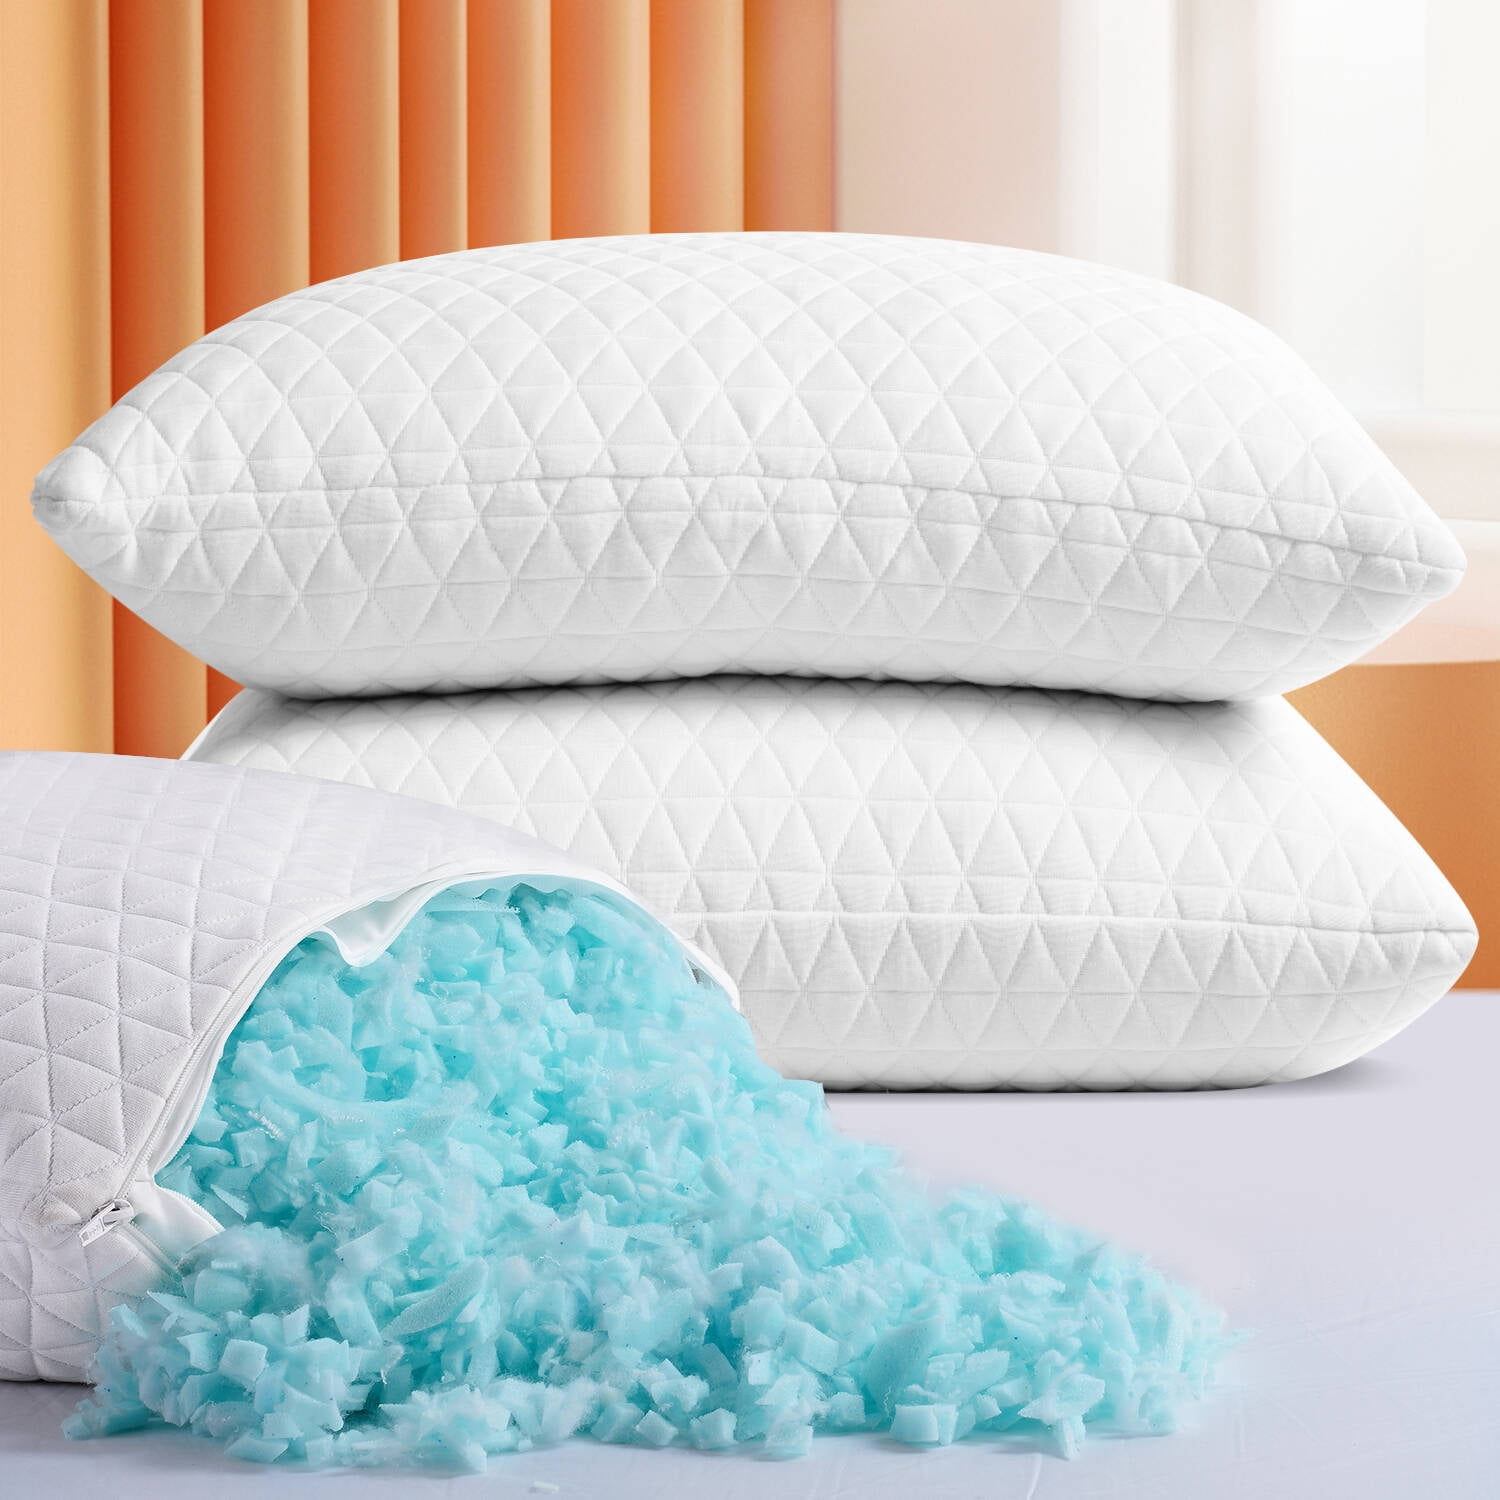 2 Pack Shredded Memory Foam Bed Pillows for Sleeping - Bamboo Cooling